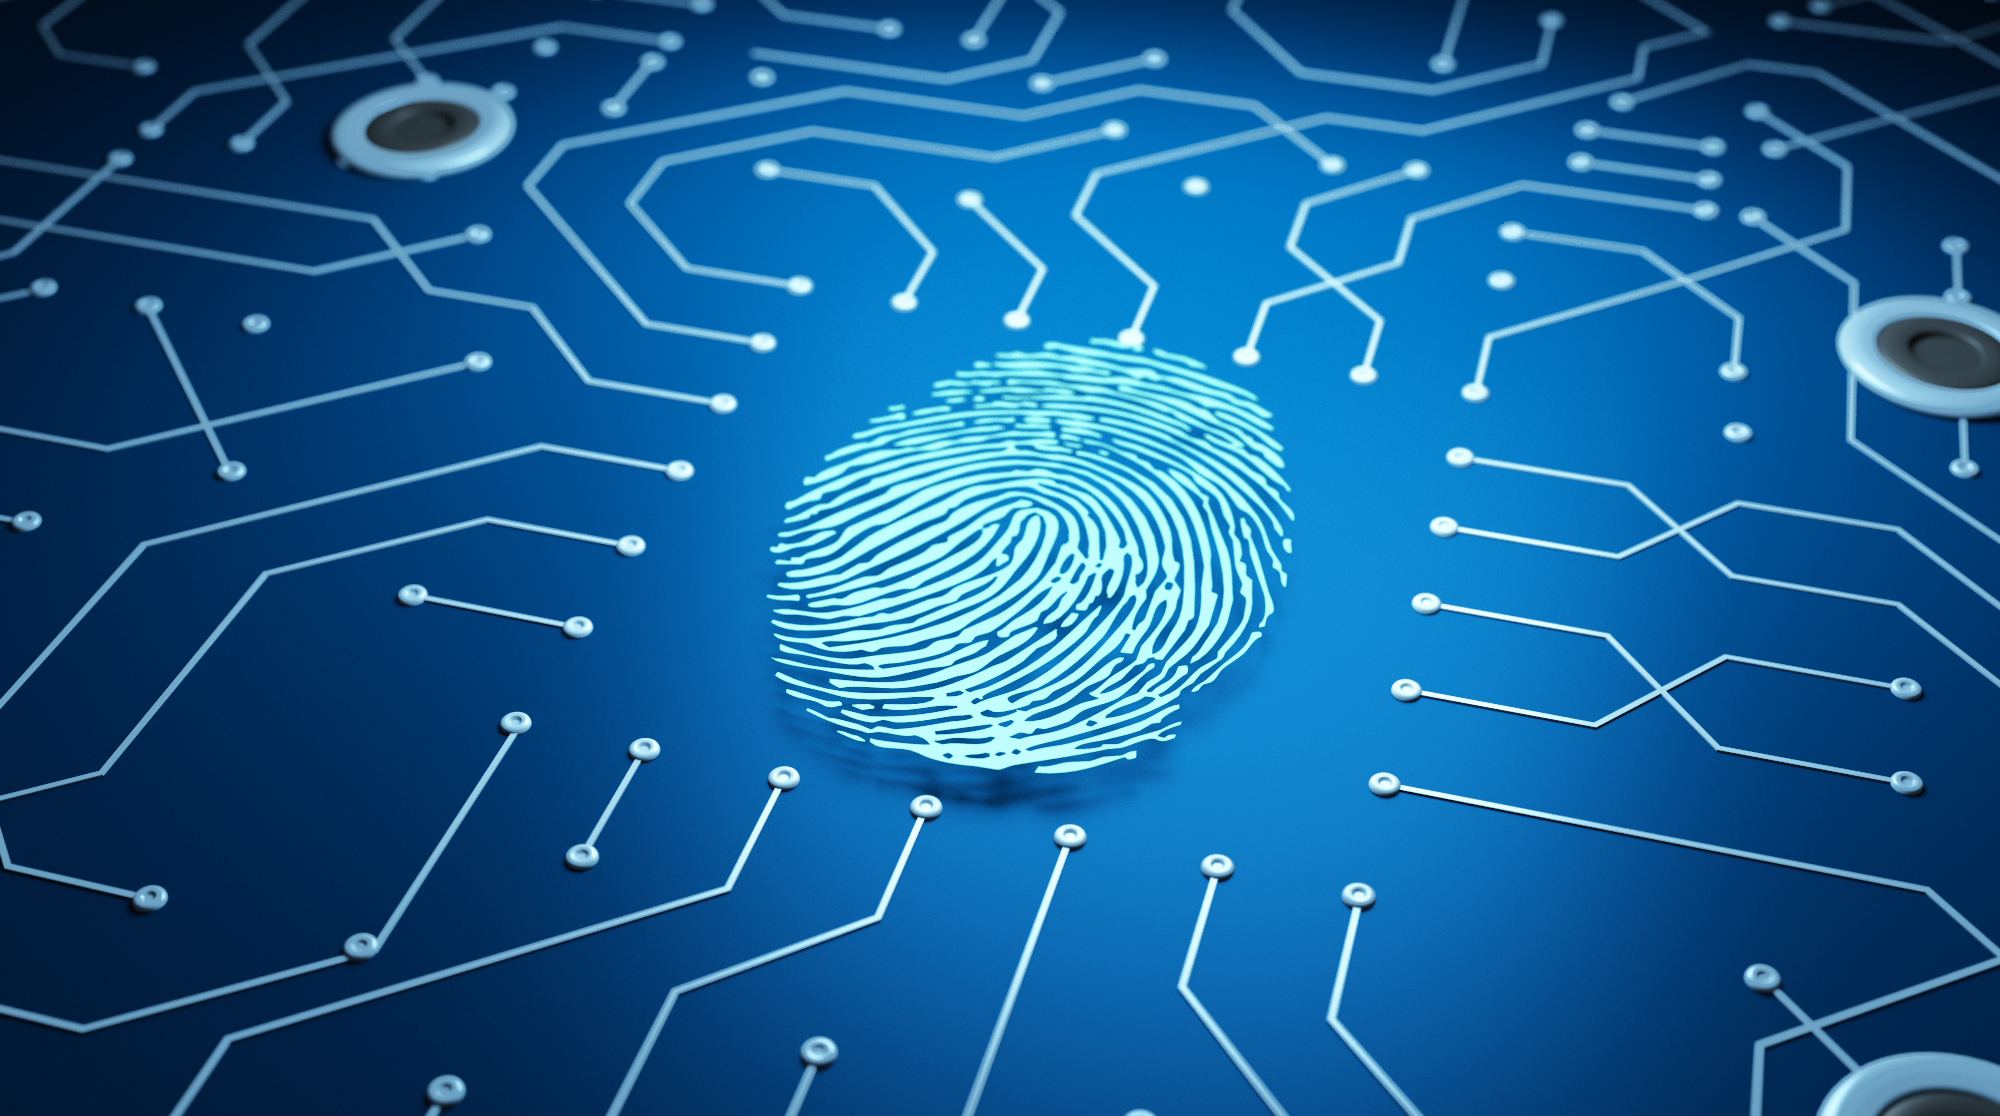 In 2014, the small array fingerprint sensing chip was introduced